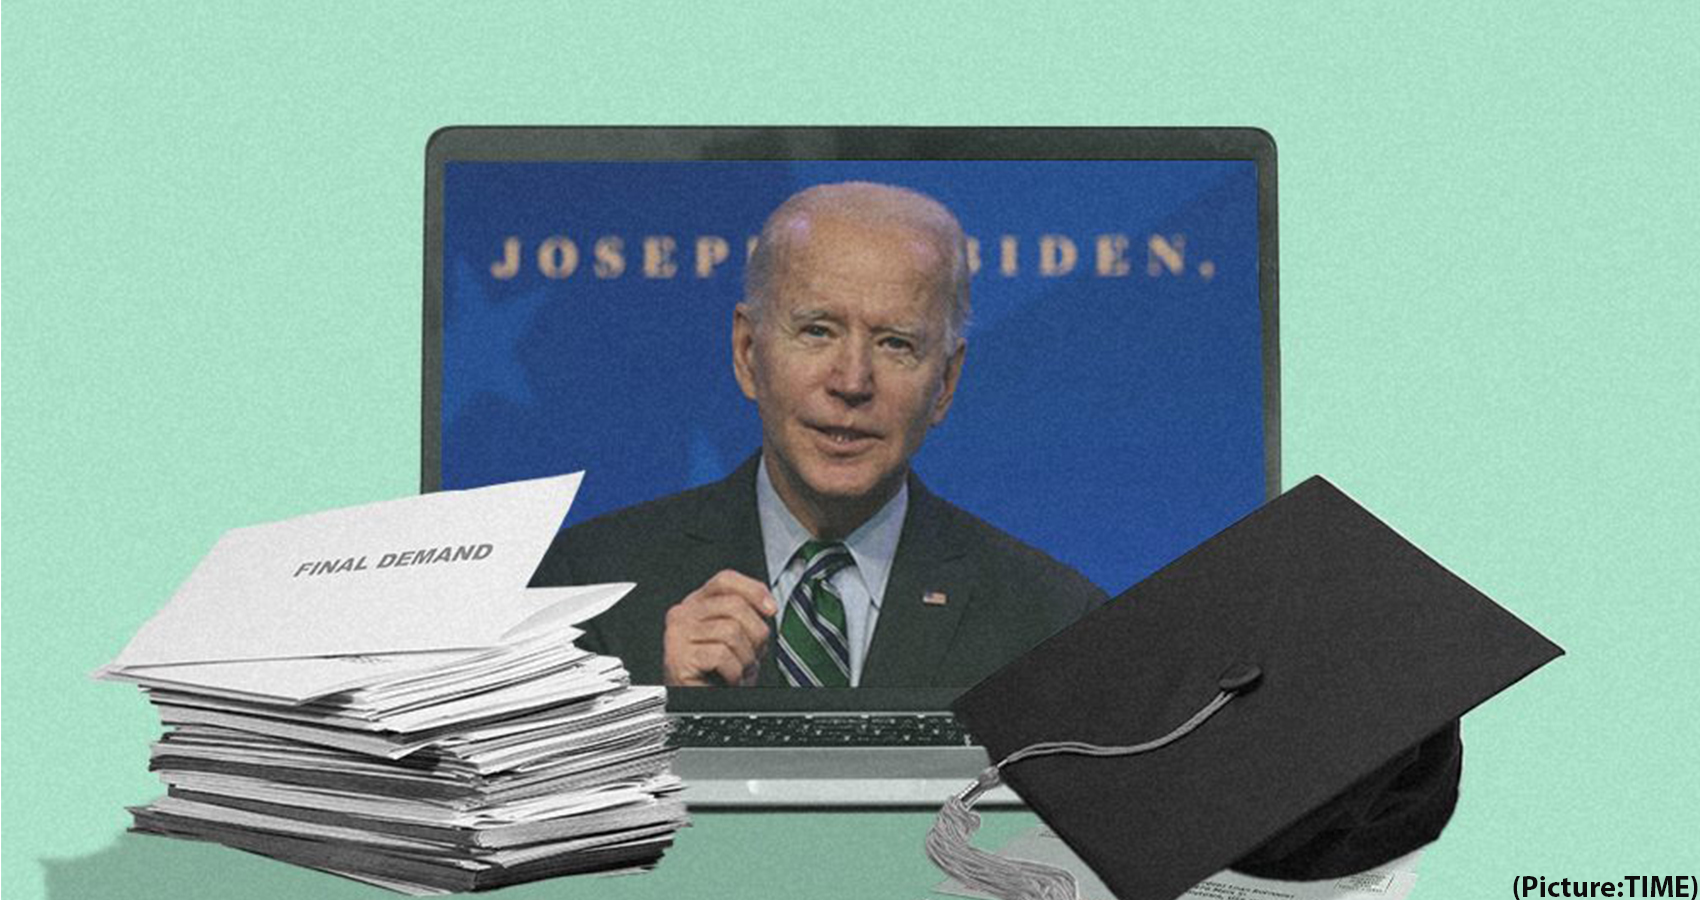 Biden Administration Grants Automatic Student Loan Forgiveness To 325,000 Permanently Disabled Borrowers